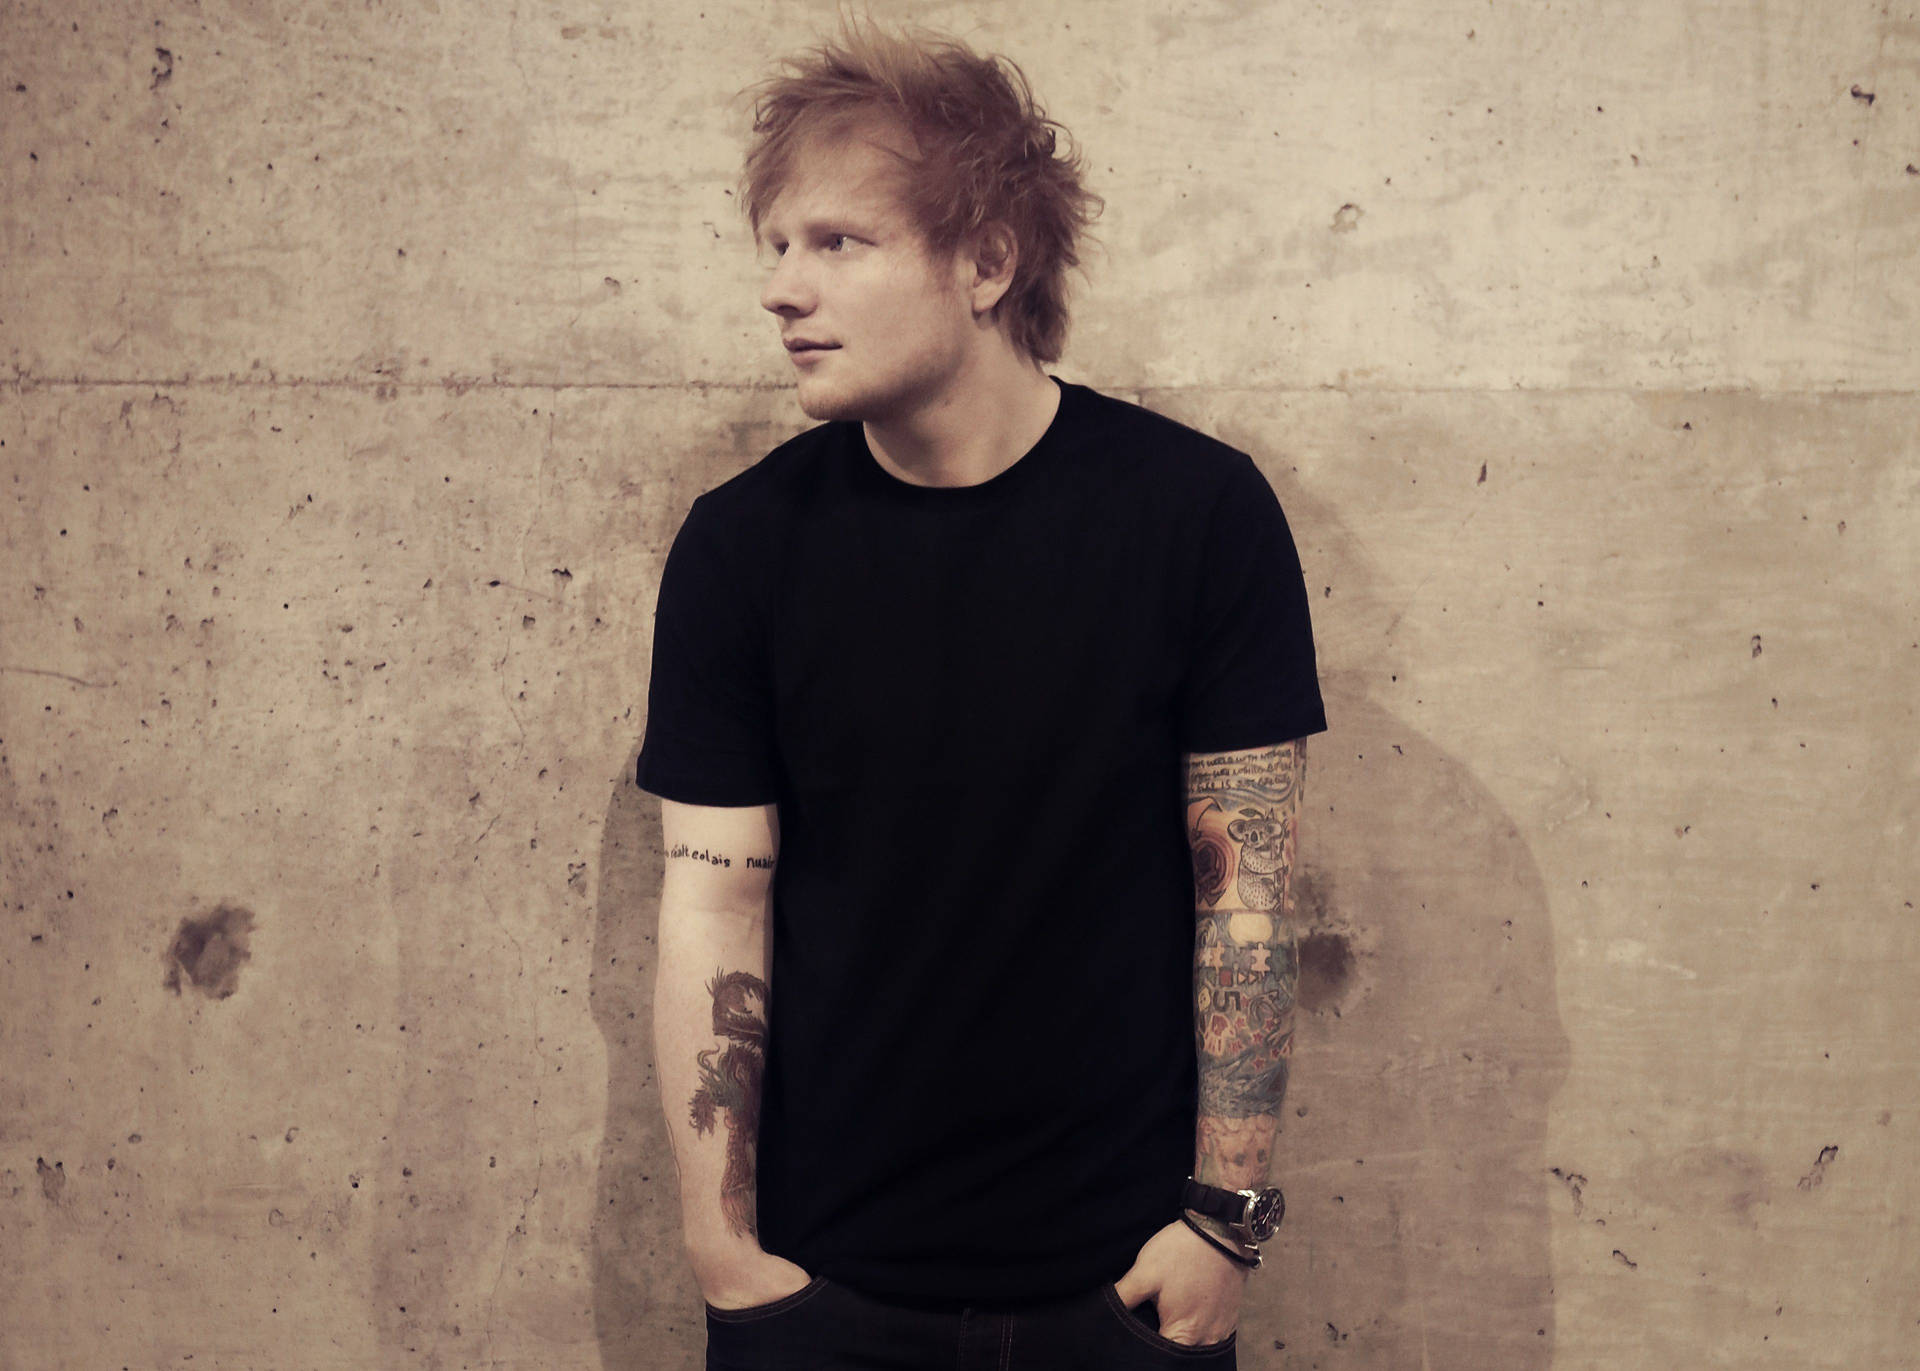 Ed Sheeran Is Ready For His Fans. Background